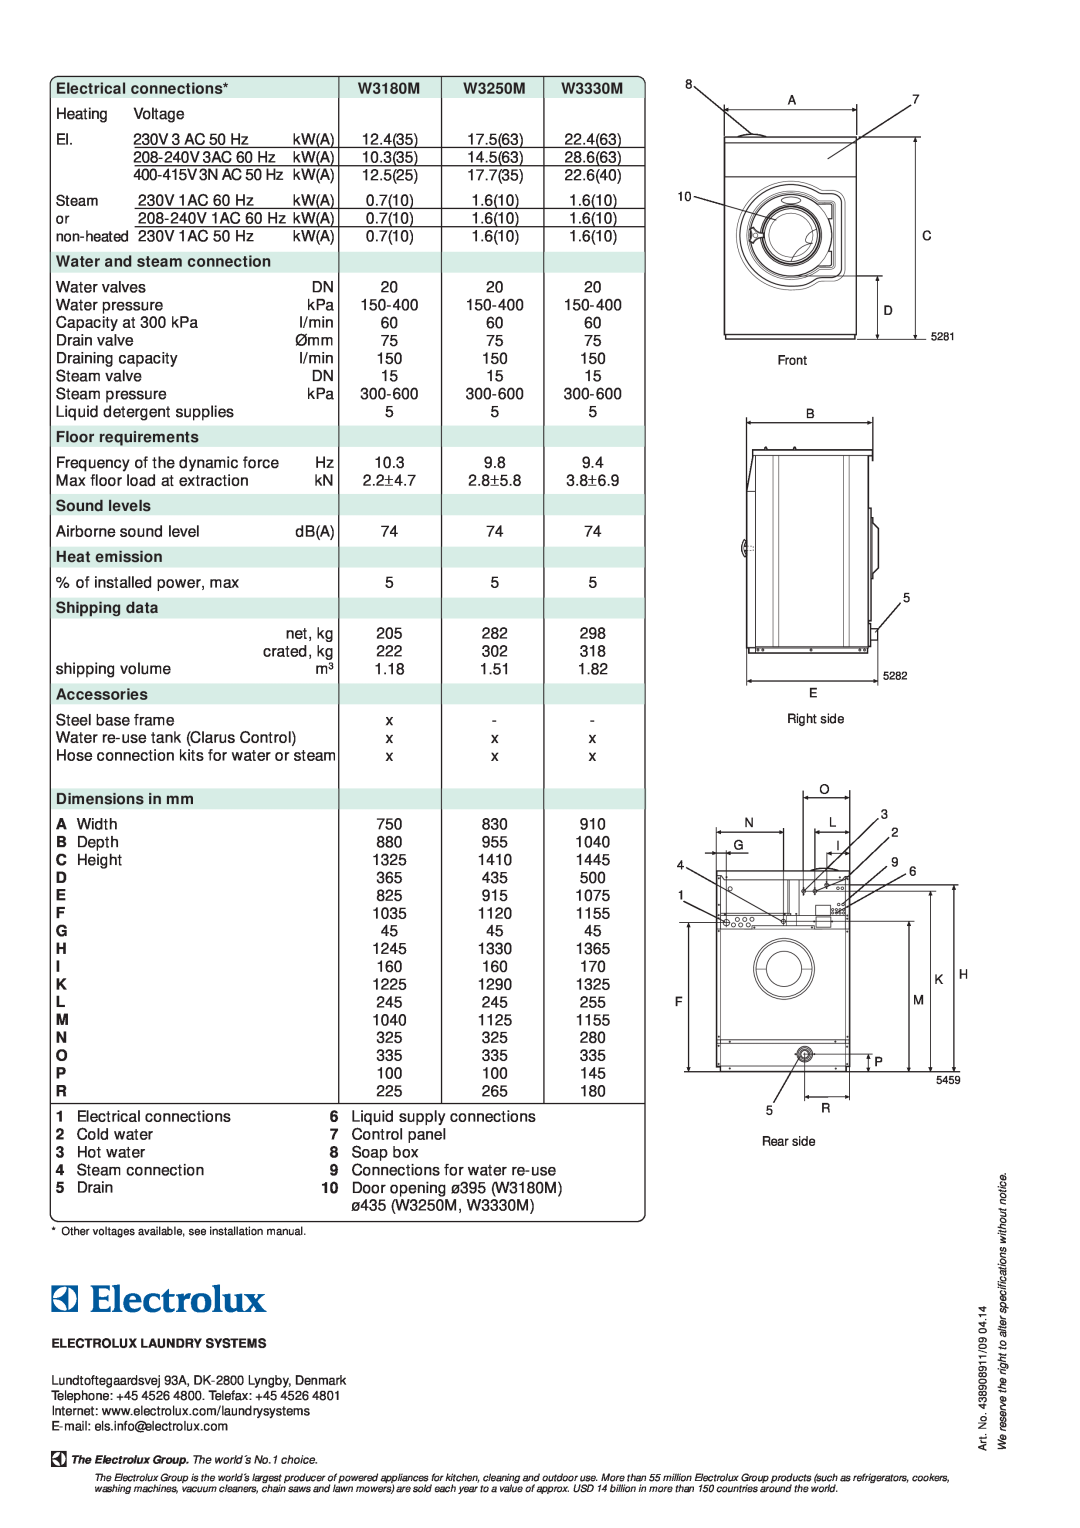 Electrolux W3180M specifications Electrical connections 